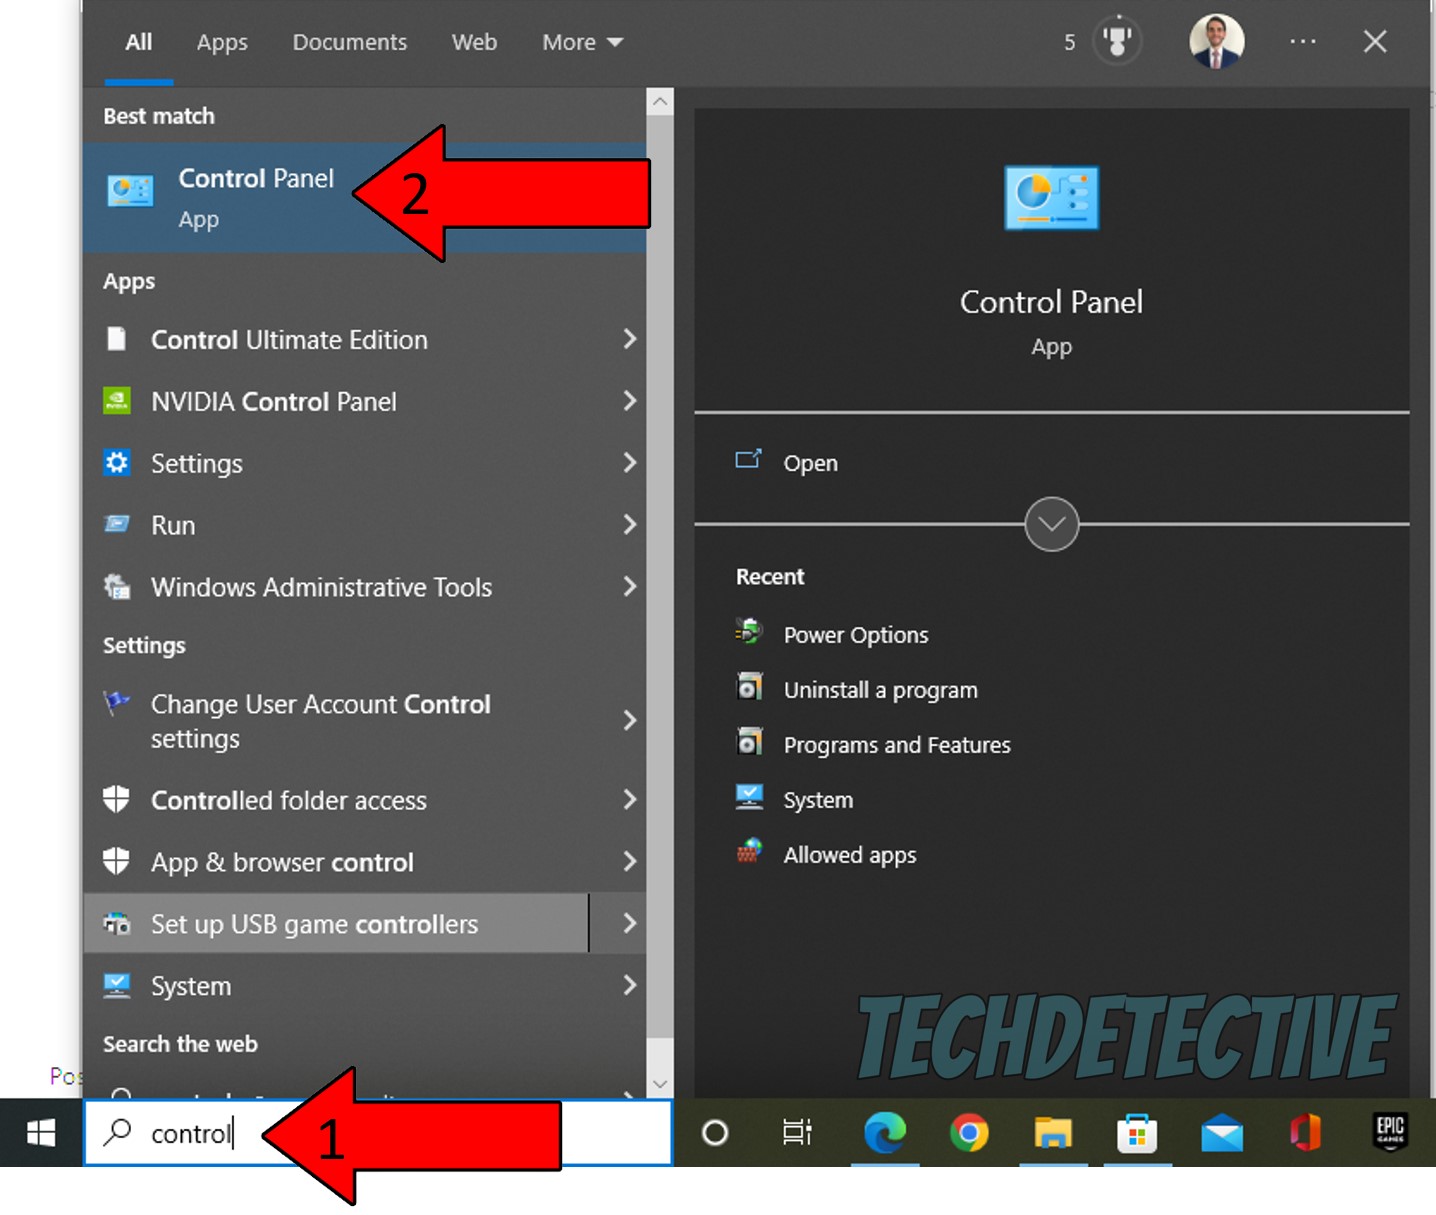 How to access the Control Panel on Windows 10